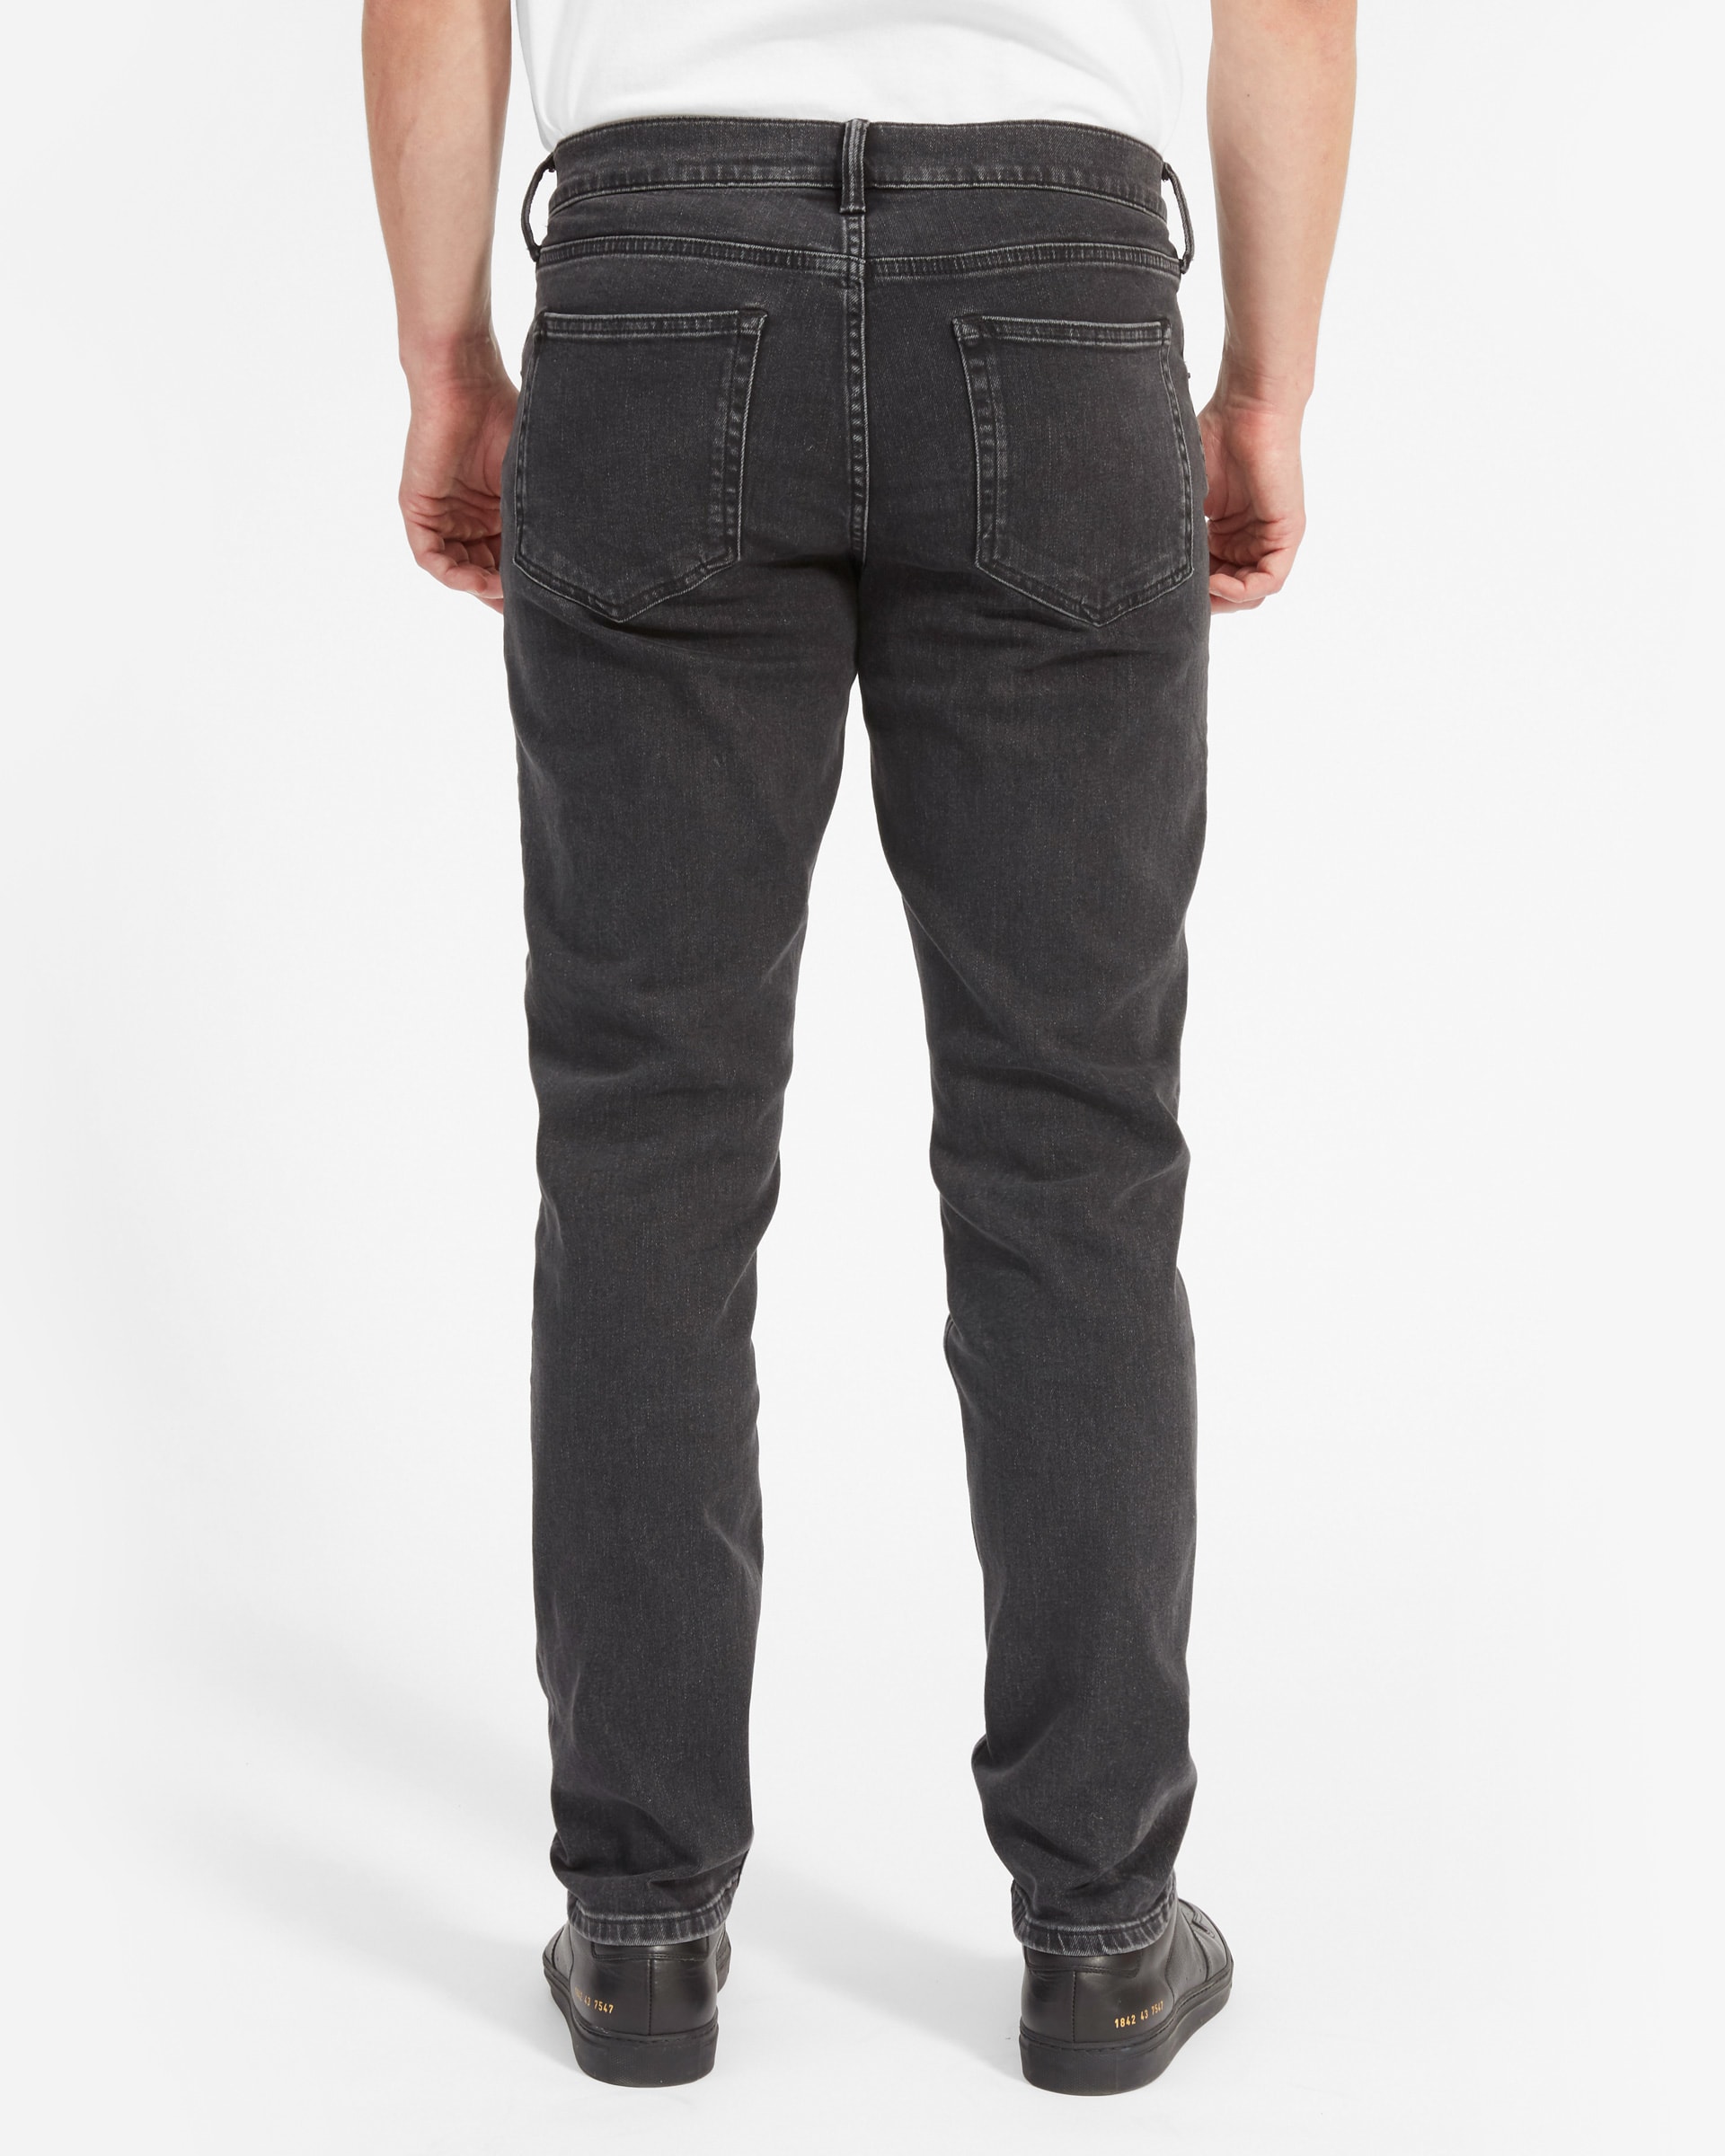 The Athletic Fit Jean Washed Black – Everlane